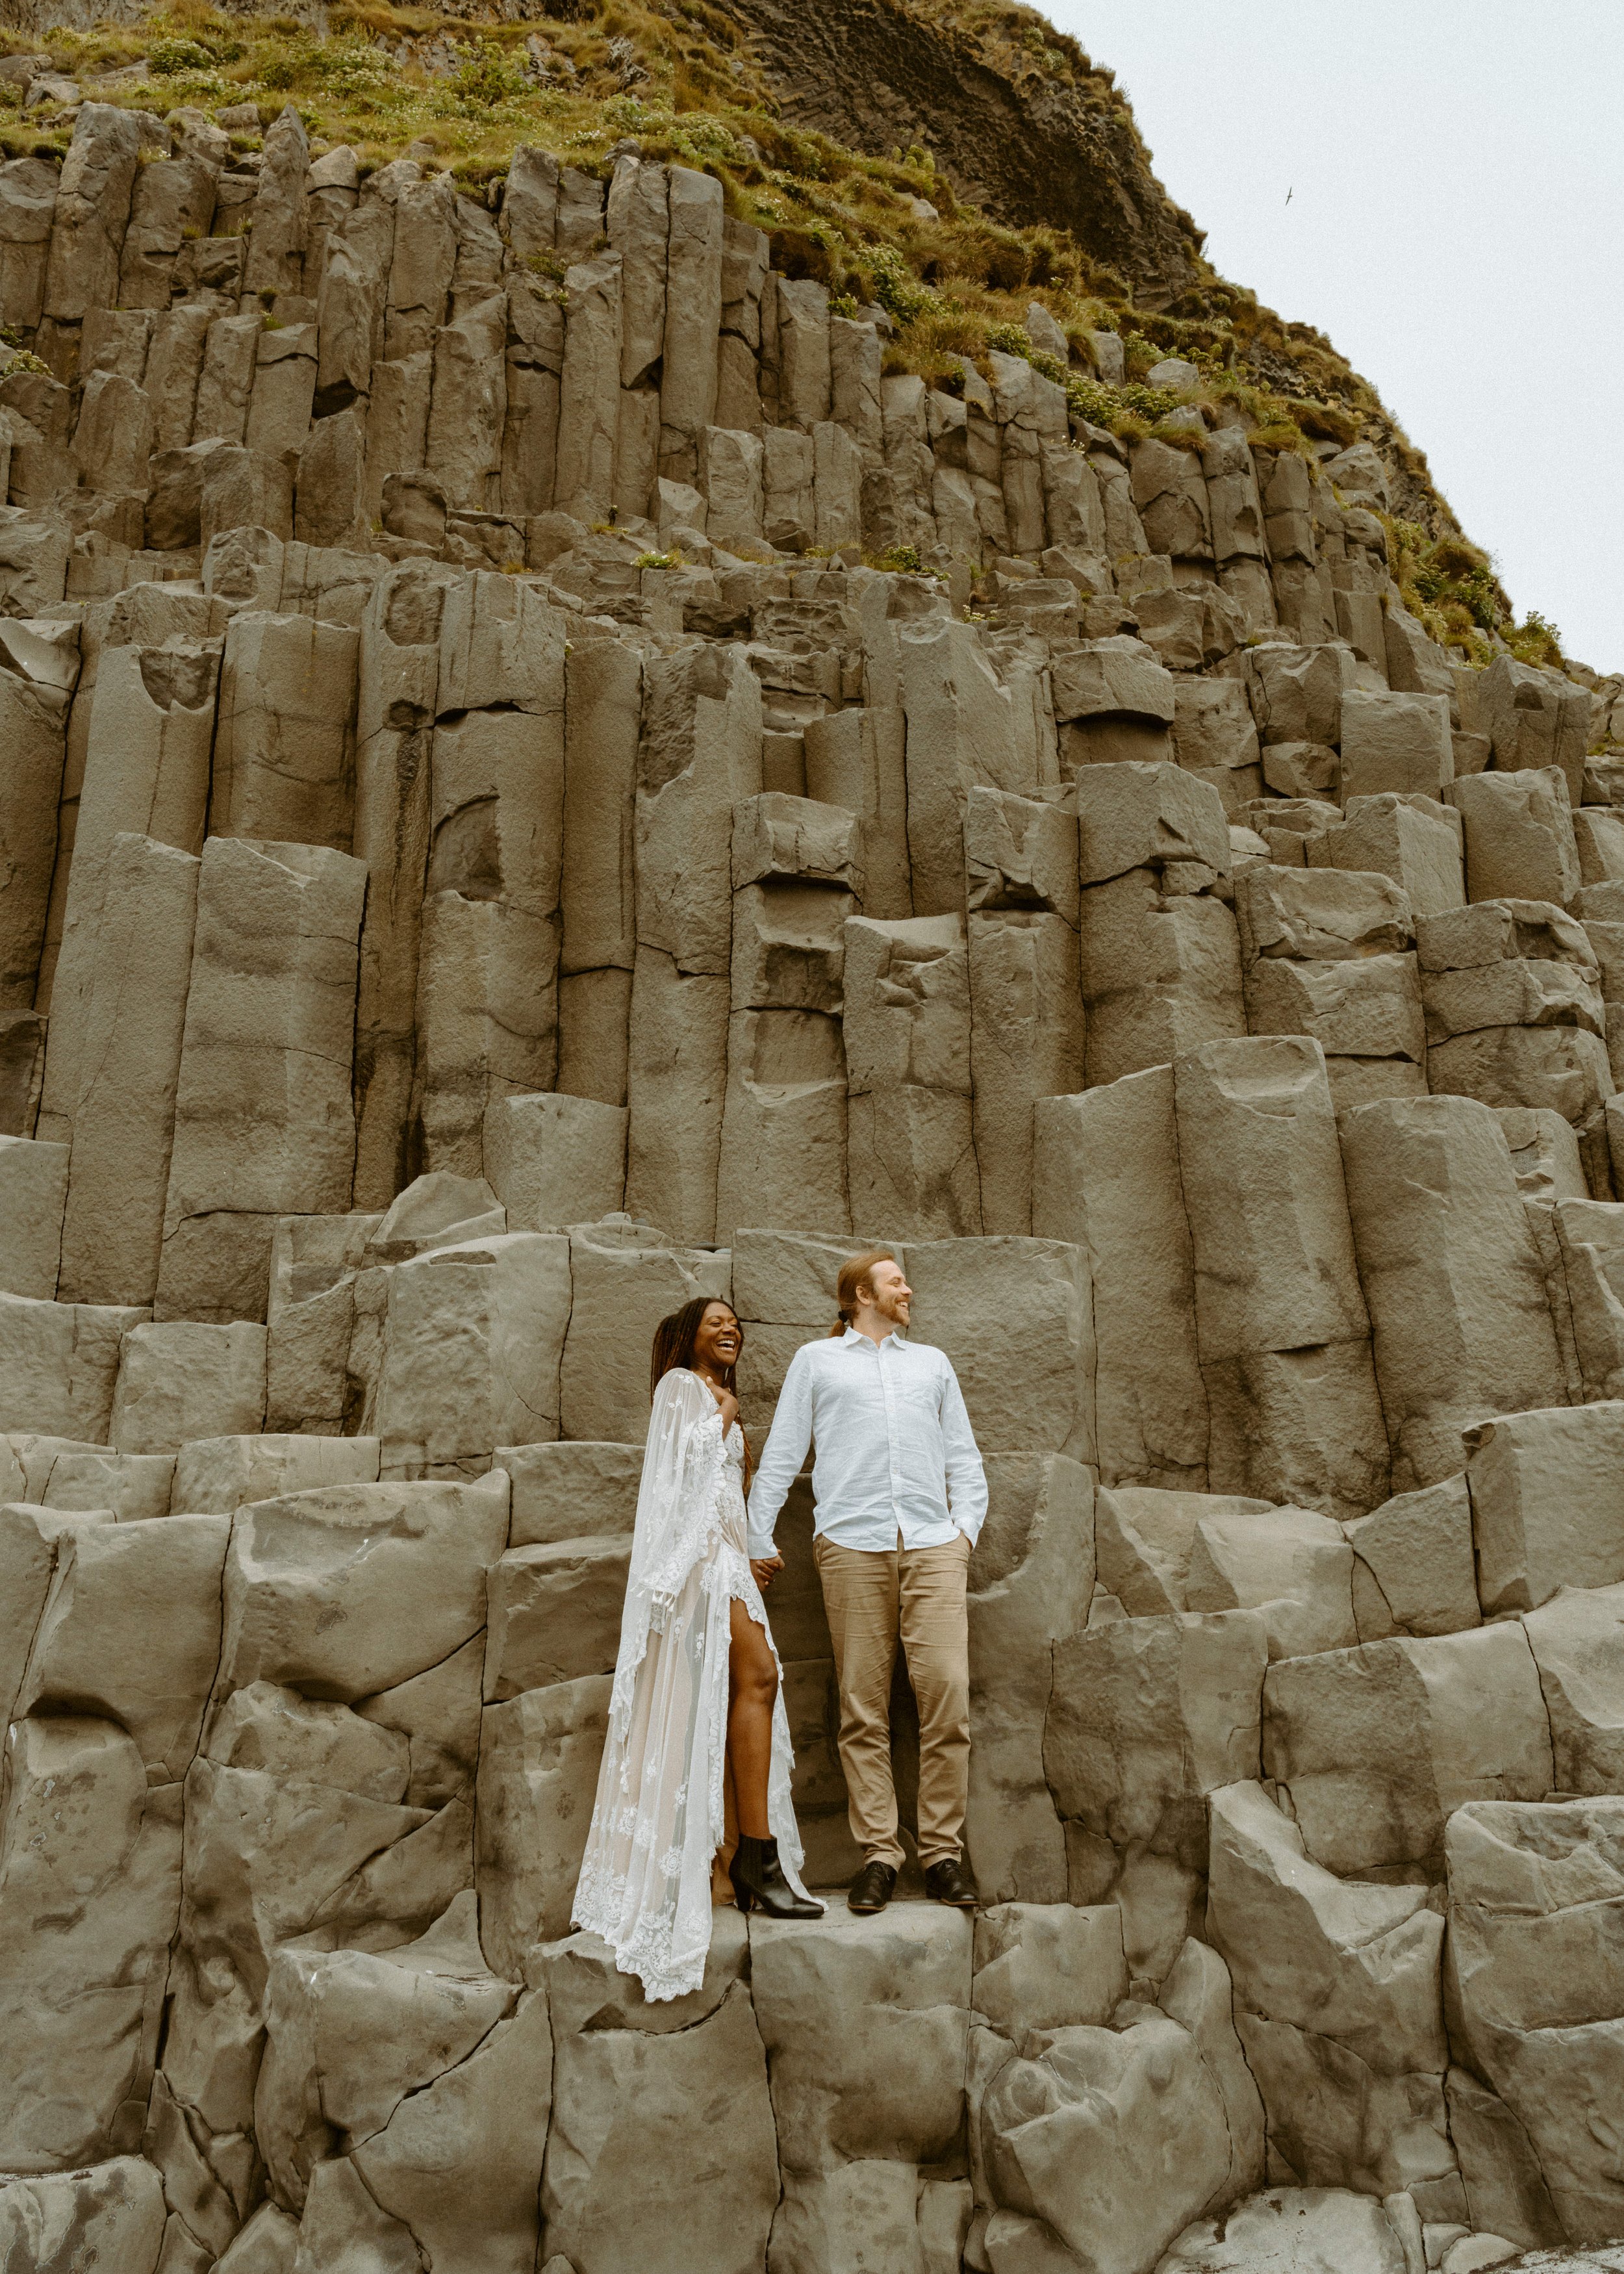 Iceland Elopement Photographer | Best places to elope in Iceland | Reynisfjara Black Sand Beach (Copy)